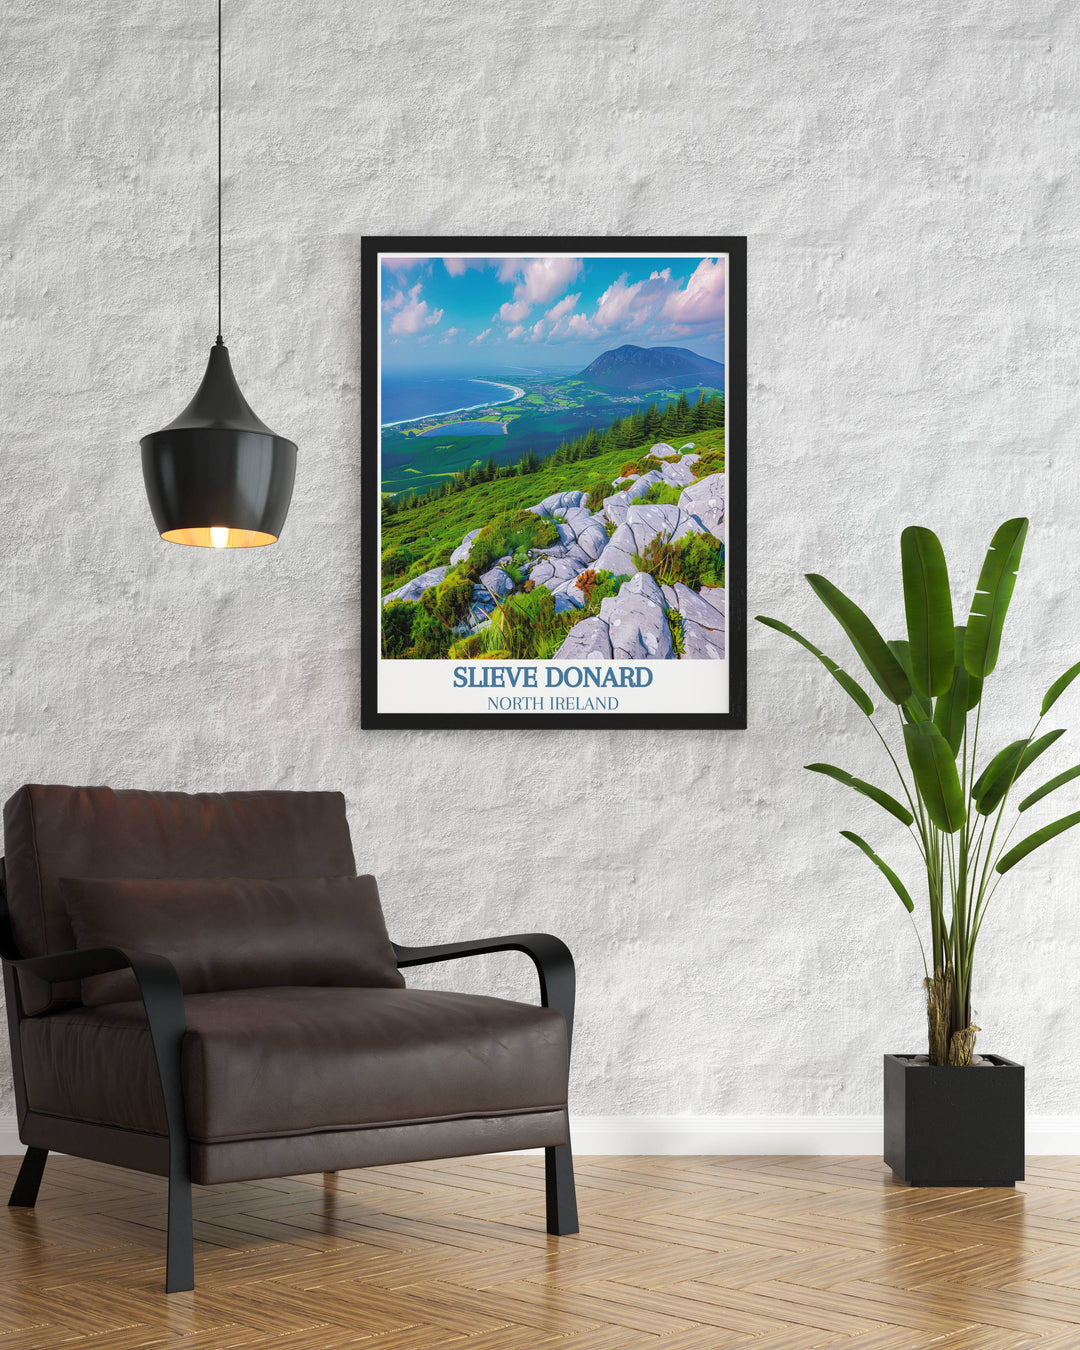 Modern wall decor of Slieve Donard summit showcases the awe inspiring landscapes of Northern Ireland. The detailed depiction of the mountains grandeur and the serene environment is perfect for creating a peaceful and inspiring atmosphere in your home.